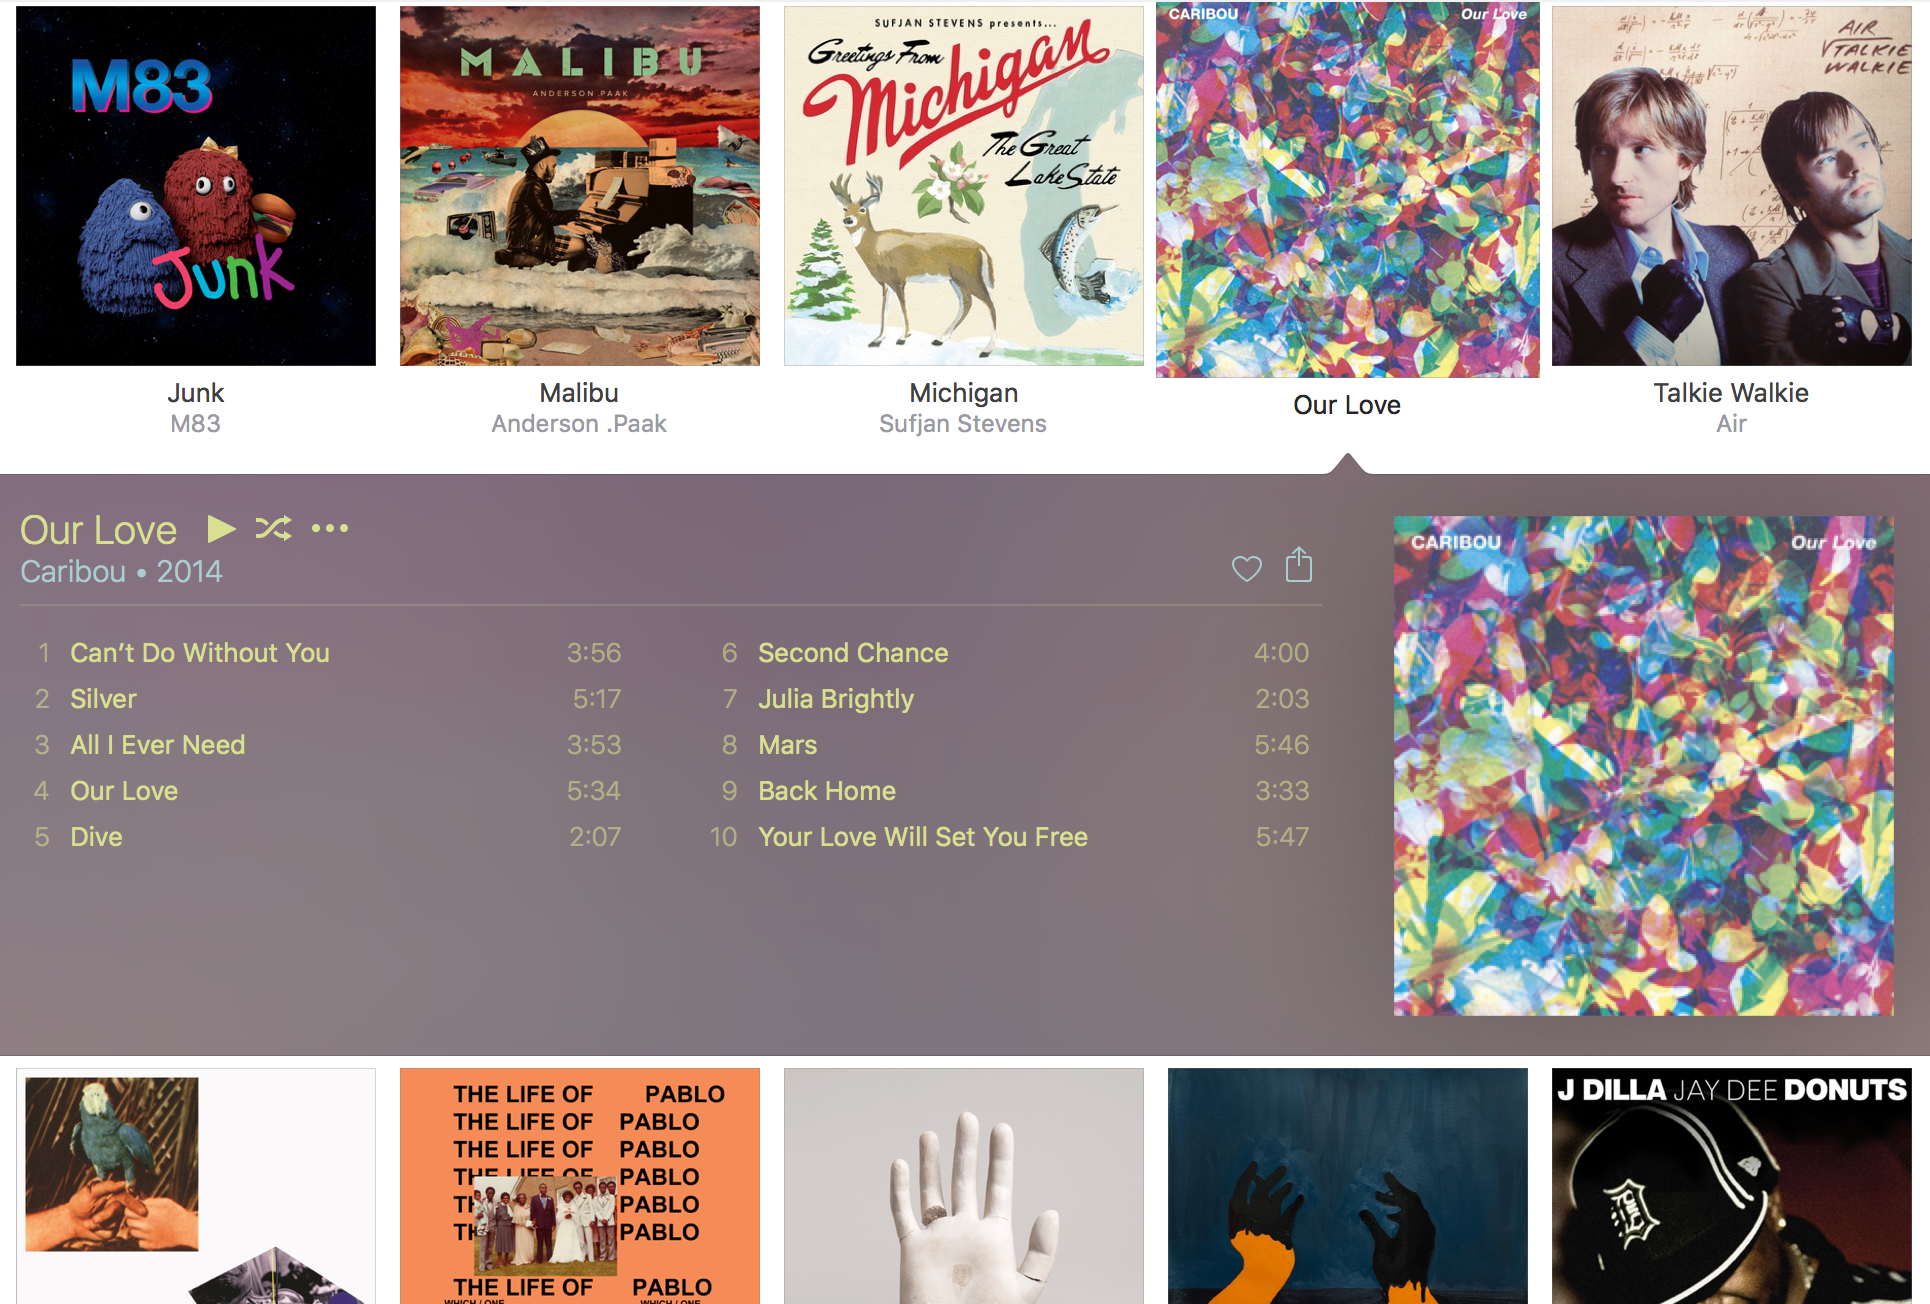 iTunes automatic color-matching for albums looks nice